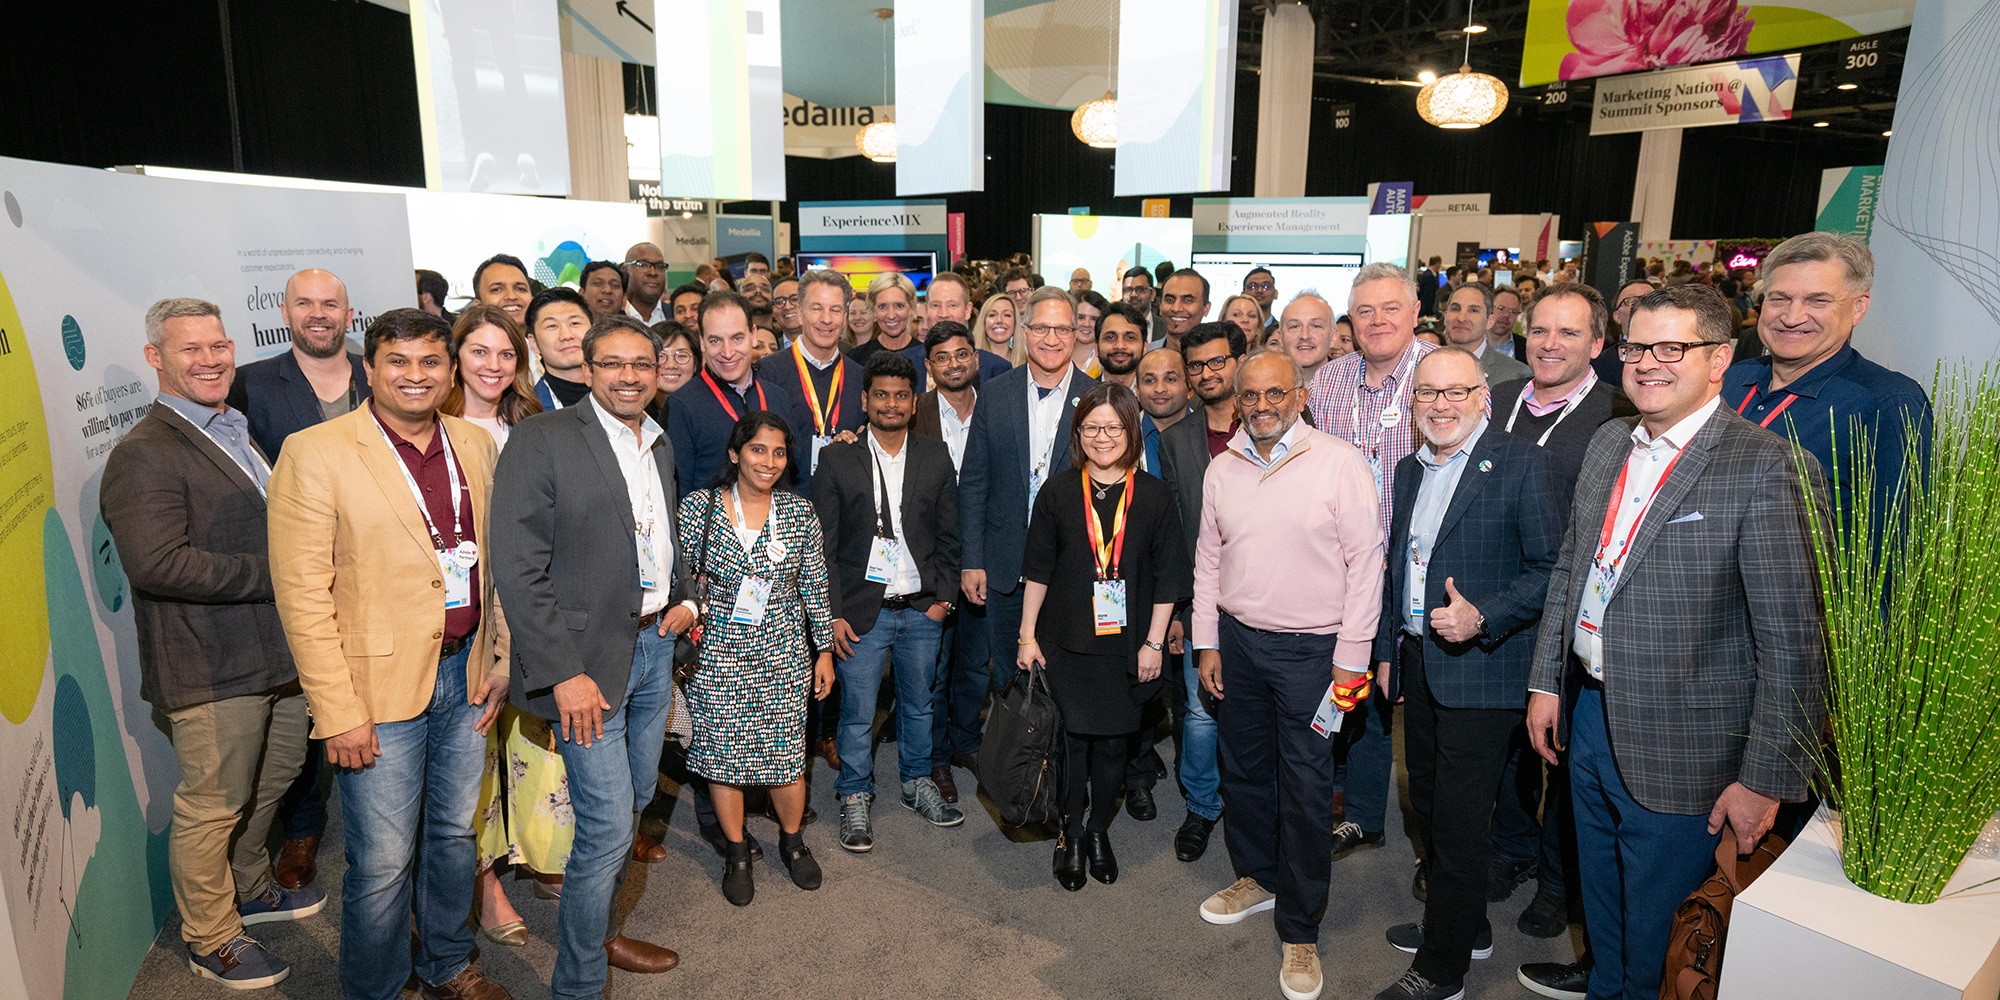 Adobe Chairman and CEO, Shantanu Narayen, stops by our booth to welcome us to Adobe Summit!